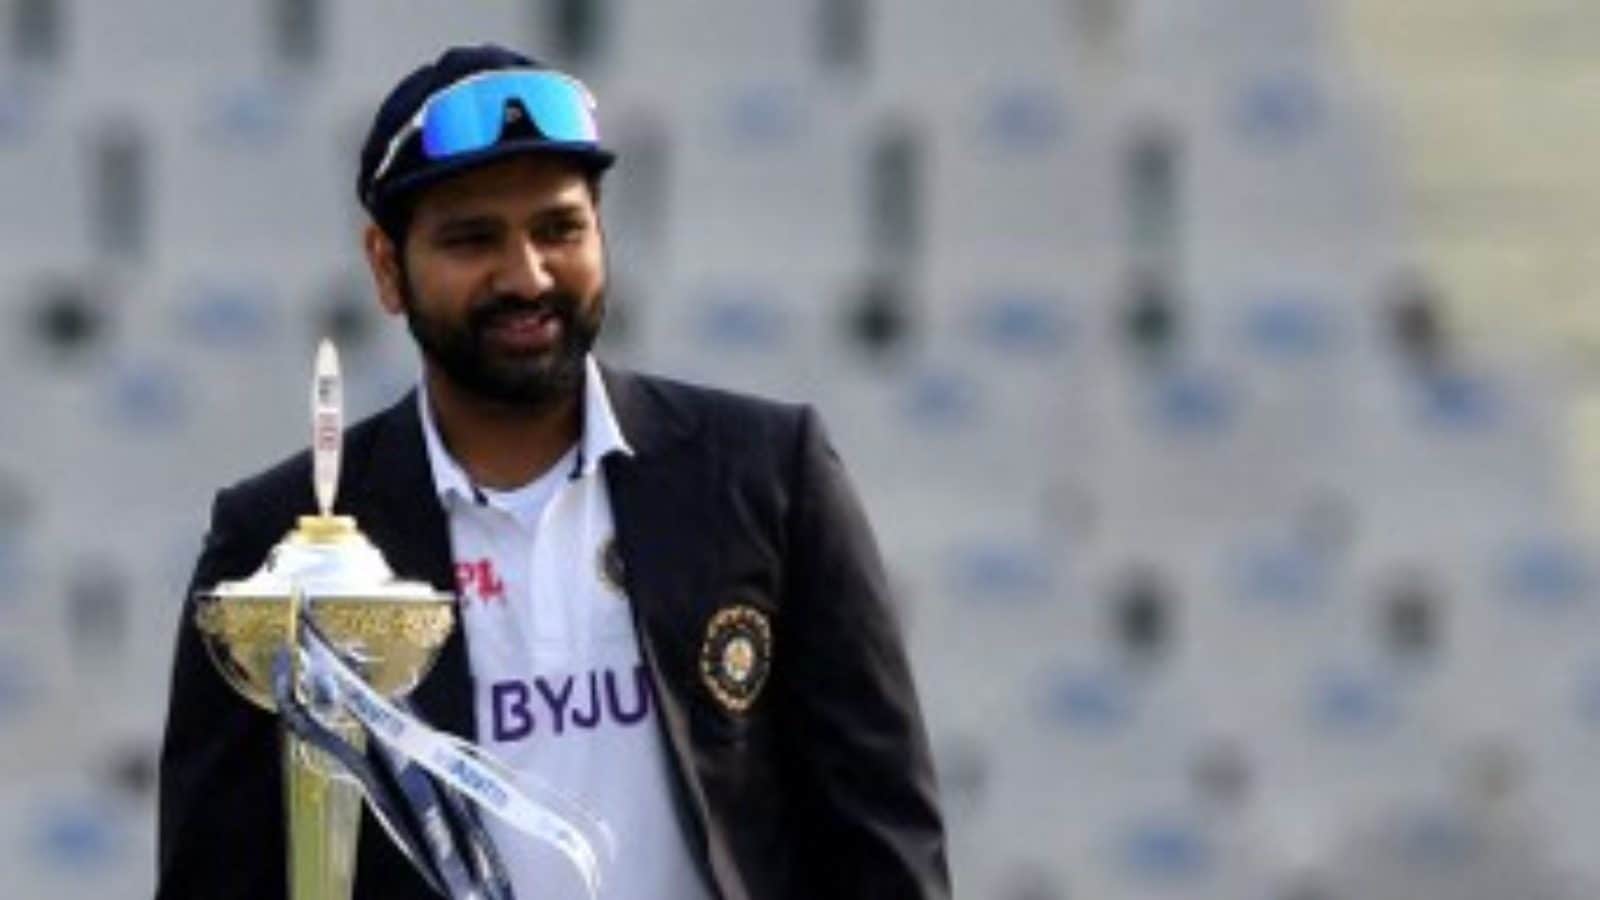 ind-vs-eng-fit-rohit-sharma-will-leave-for-england-on-june-20-with-other-teammates-report